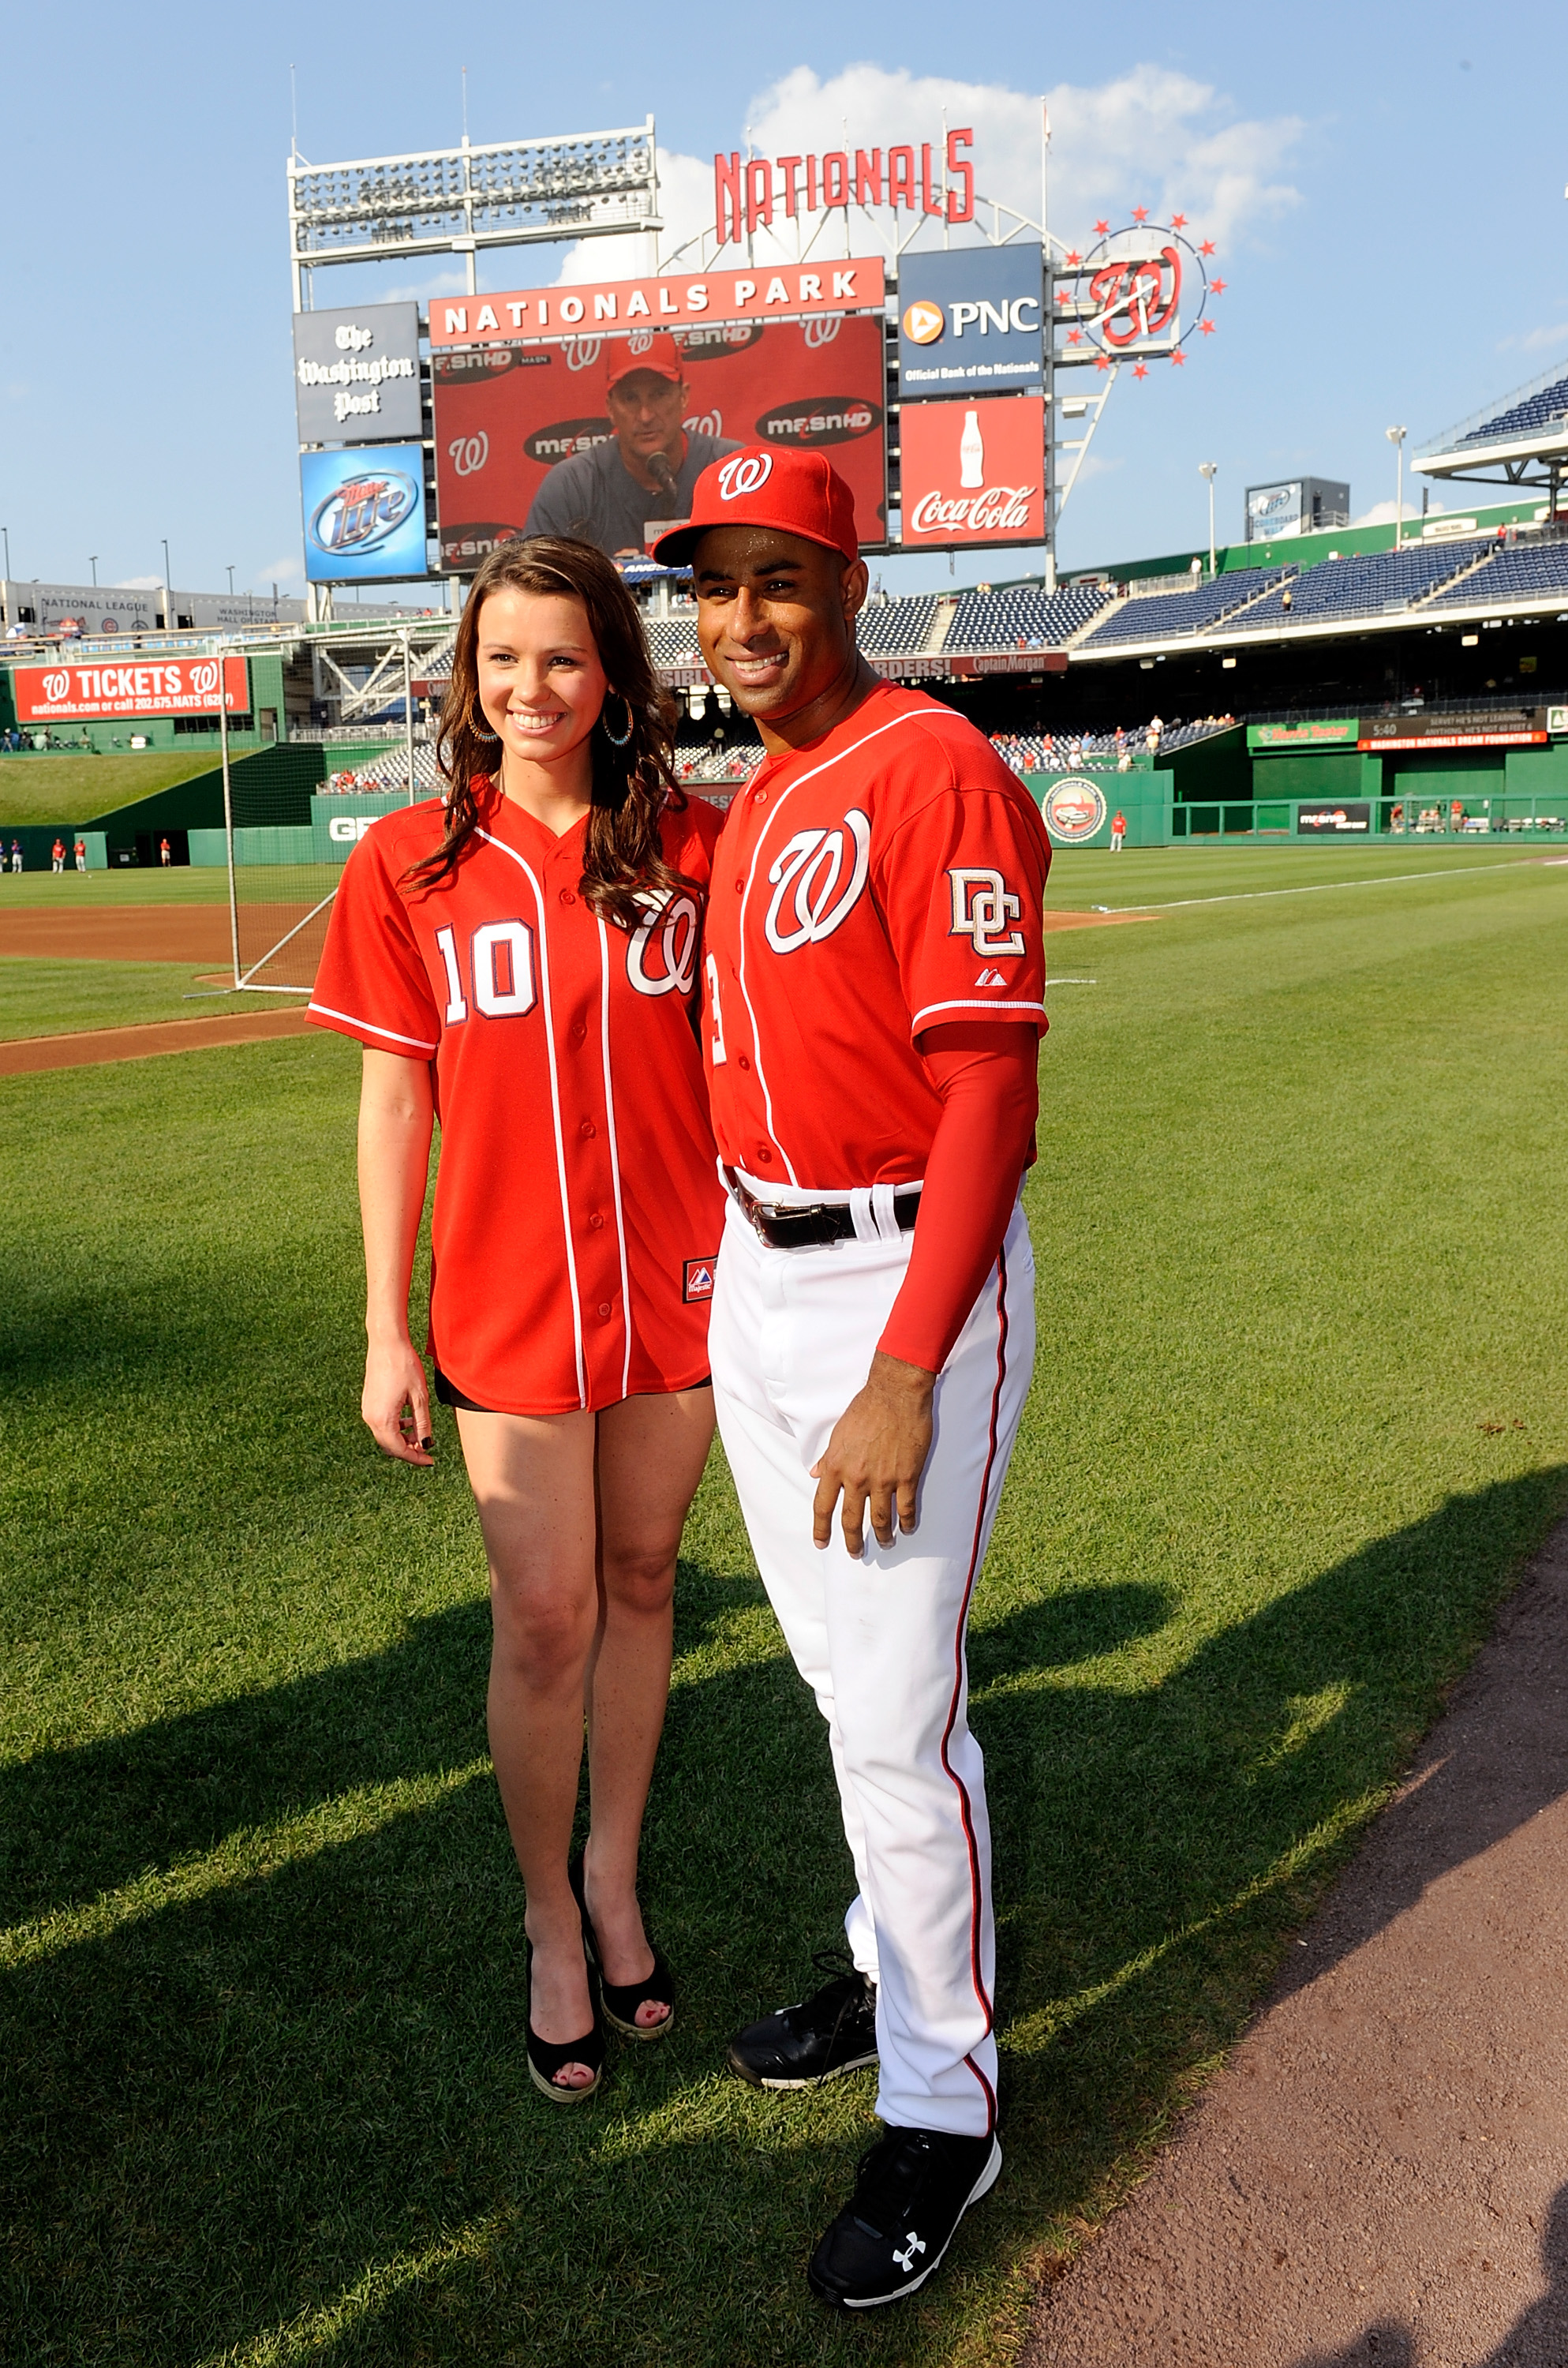 WASHINGTON - JULY 30:  Katherine Connors, Miss Iowa 2010, poses for a photo with Miguel Batista #43 of the Washington Nationals before the game against the Philadelphia Phillies at Nationals Park on July 30, 2010 in Washington, DC.  (Photo by Greg Fiume/G